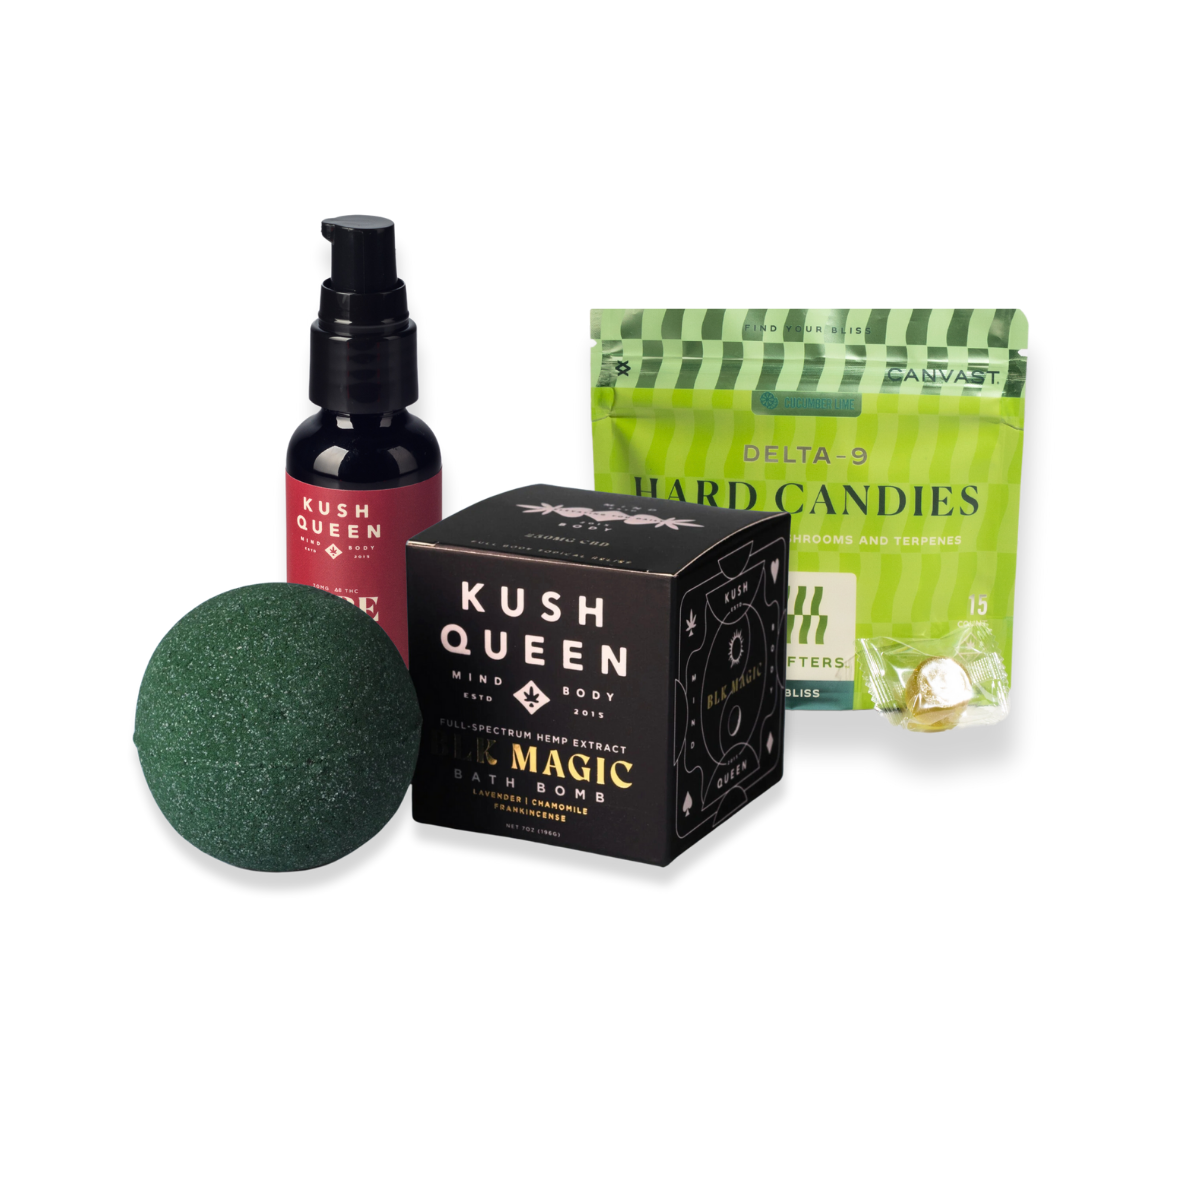 Love Bundle Offer including 1 Kush Queen Black Magic Bath Bomb, 1 Kush Queen THC Lube, and 1 6-count bag of Canvast Shifters Delta-9 THC Hard Candies. Priced at $94.